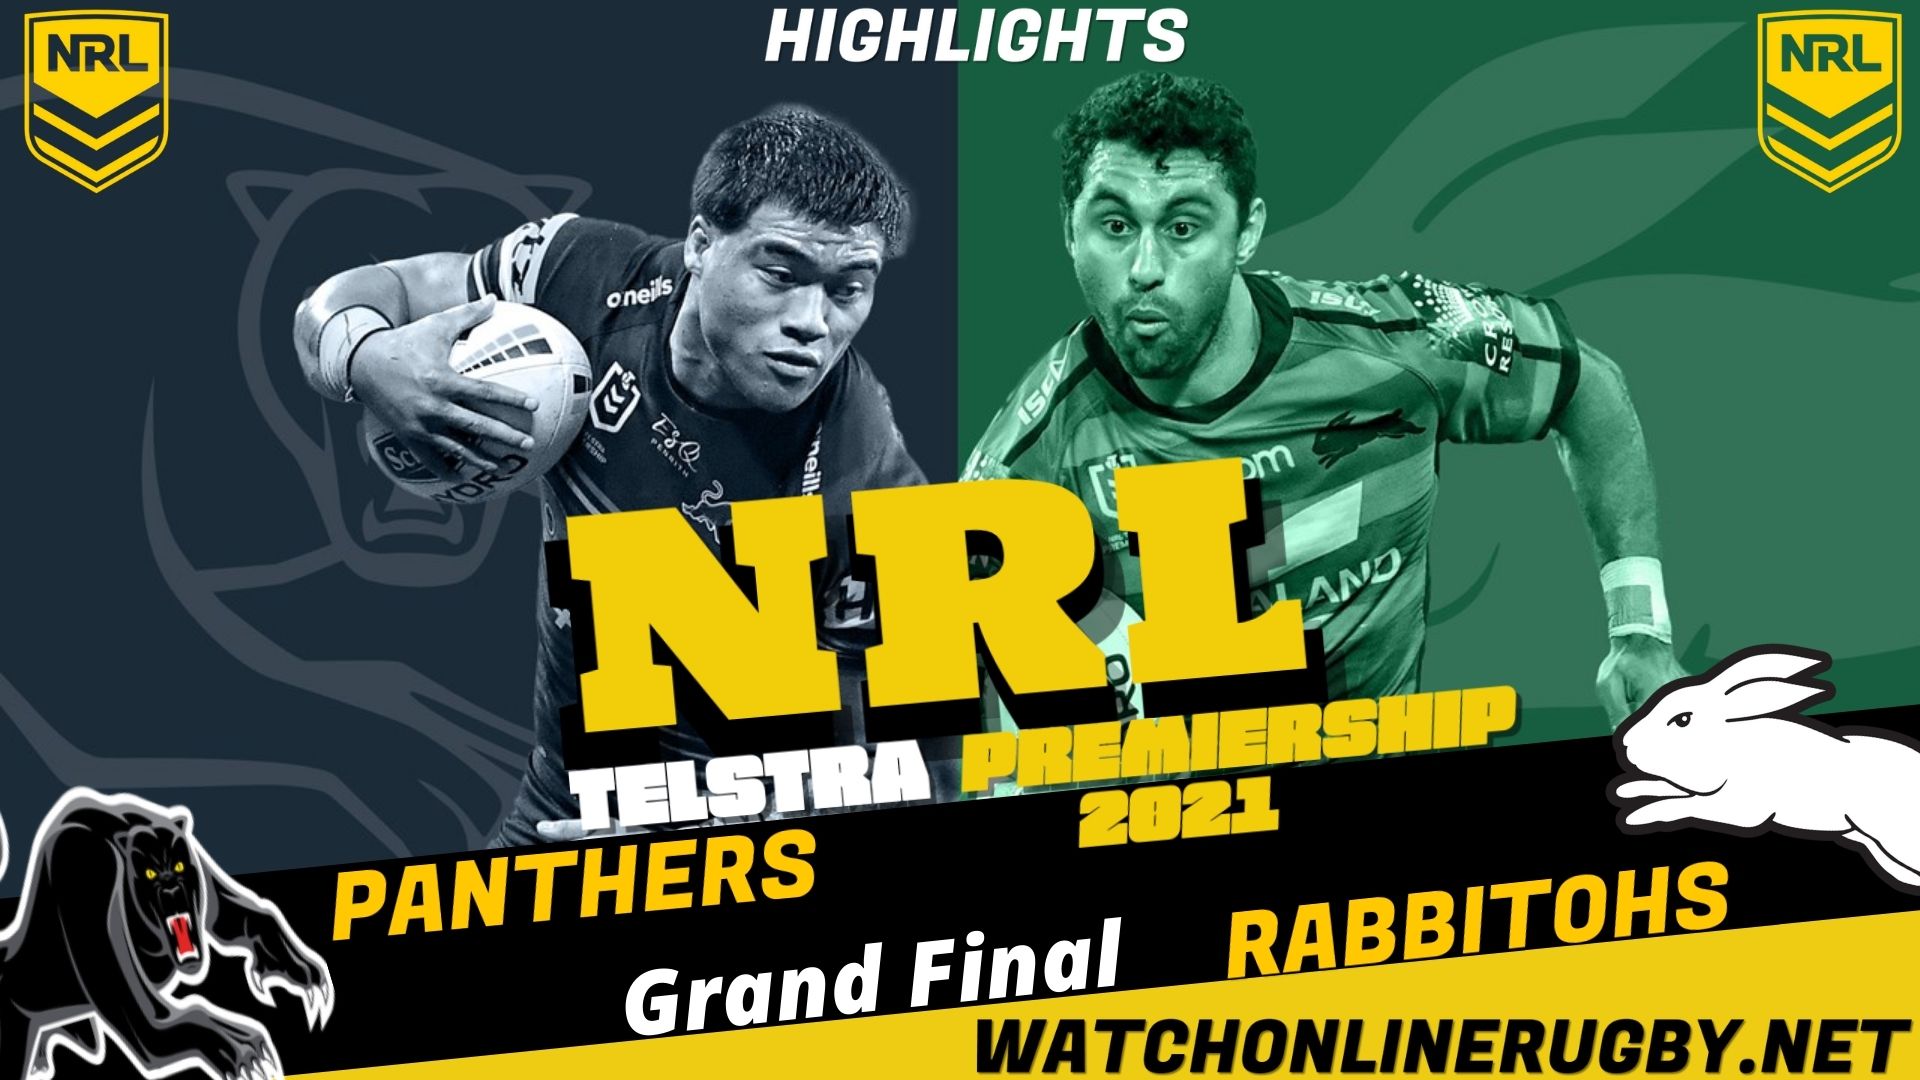 Panthers Vs Rabbitohs Highlights Grand Final NRL Rugby